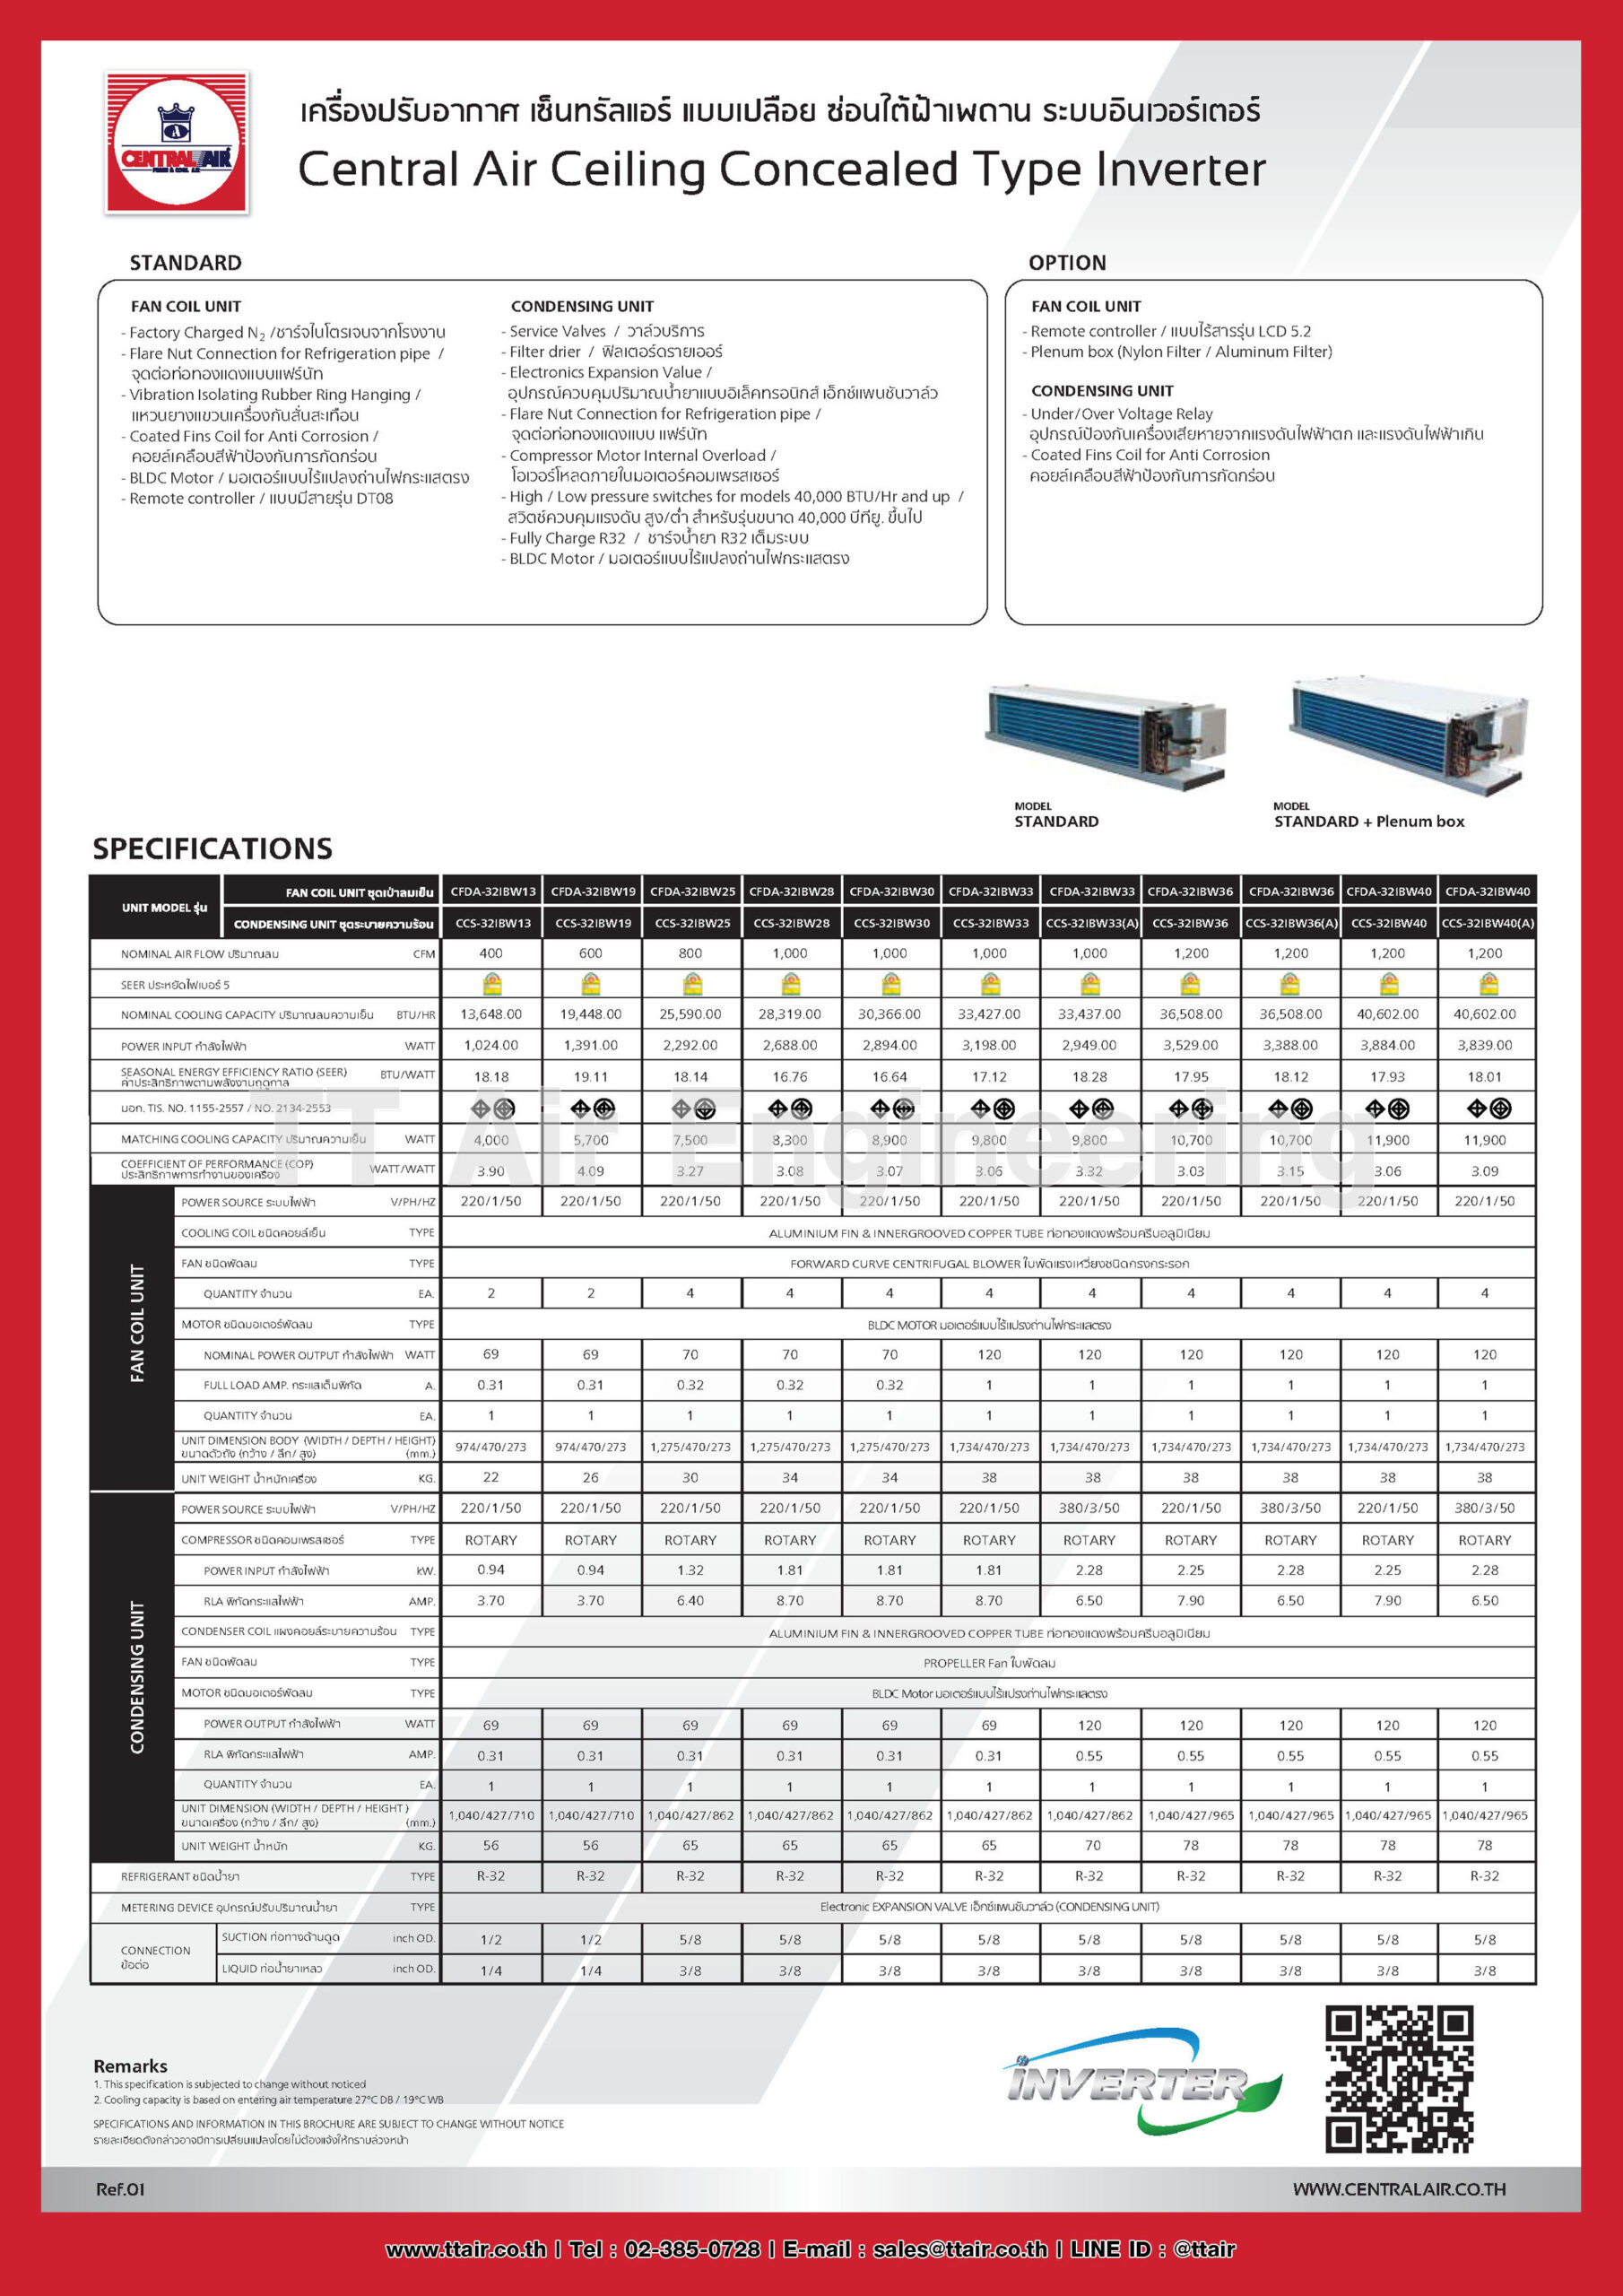 catalog CENTRAL AIR Ceiling Concealed Type CFDA-32IBW Series